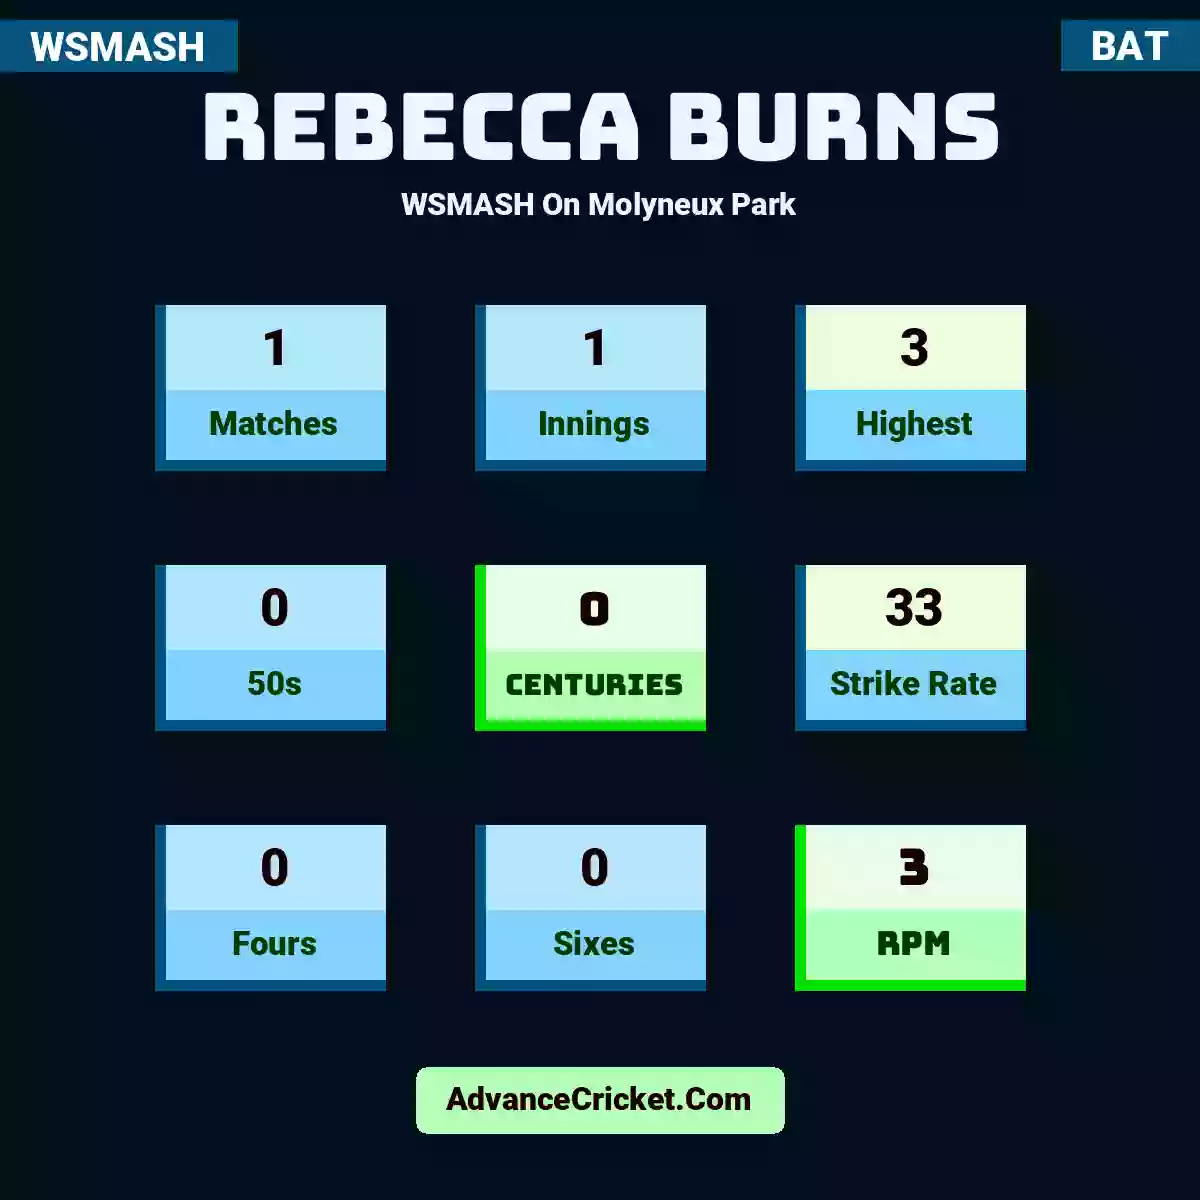 Rebecca Burns WSMASH  On Molyneux Park, Rebecca Burns played 1 matches, scored 3 runs as highest, 0 half-centuries, and 0 centuries, with a strike rate of 33. R.Burns hit 0 fours and 0 sixes, with an RPM of 3.